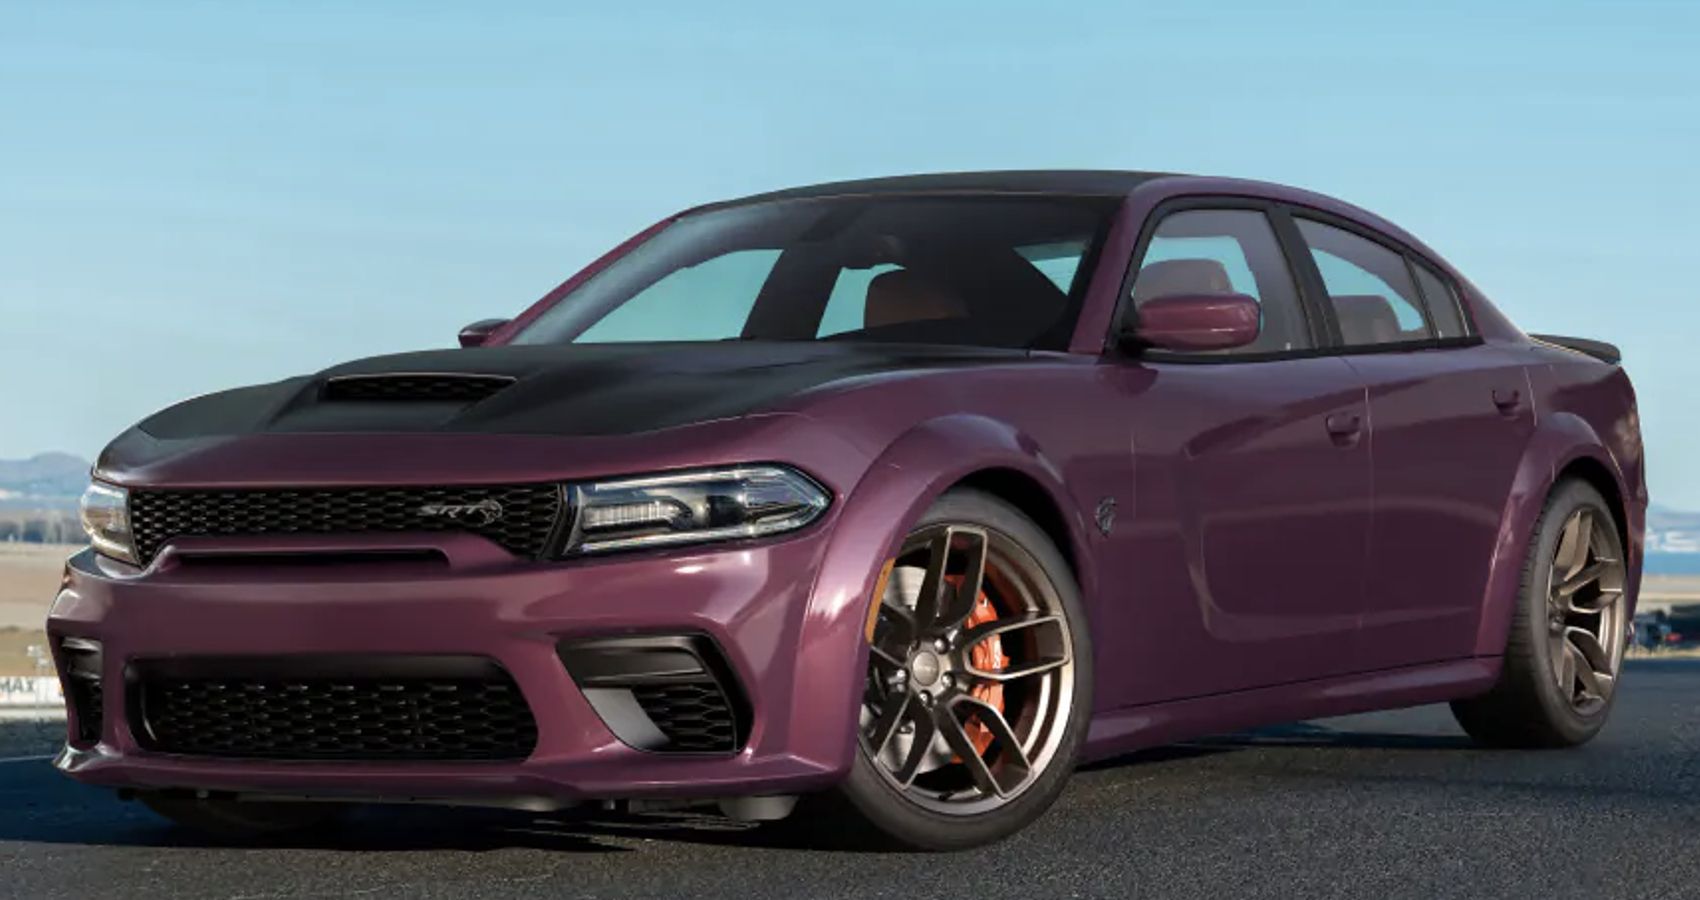 2022 Dodge Charger jailbreak front view image 